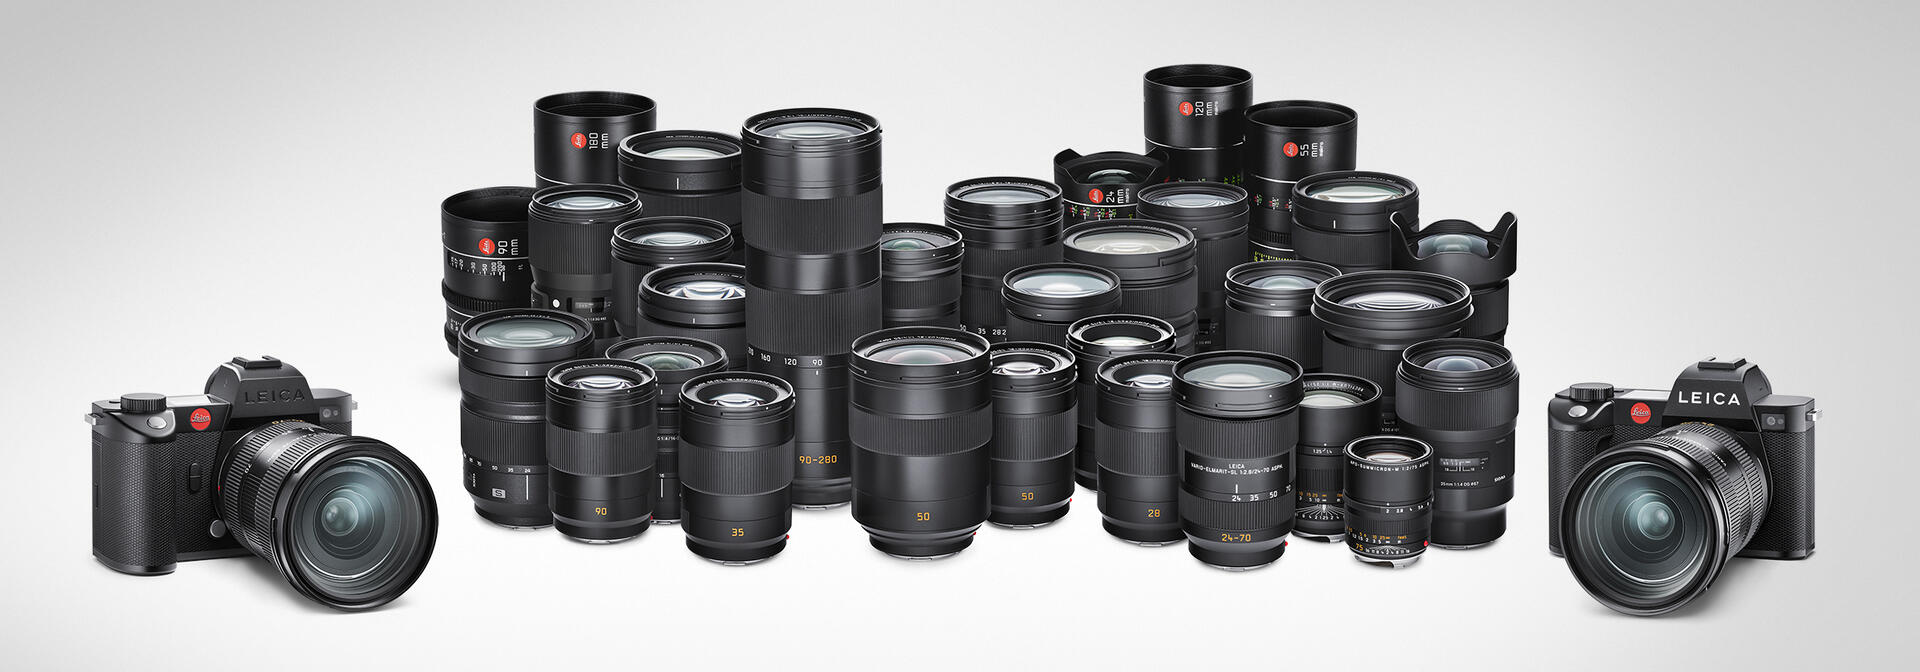 Leica SL-System - Overview